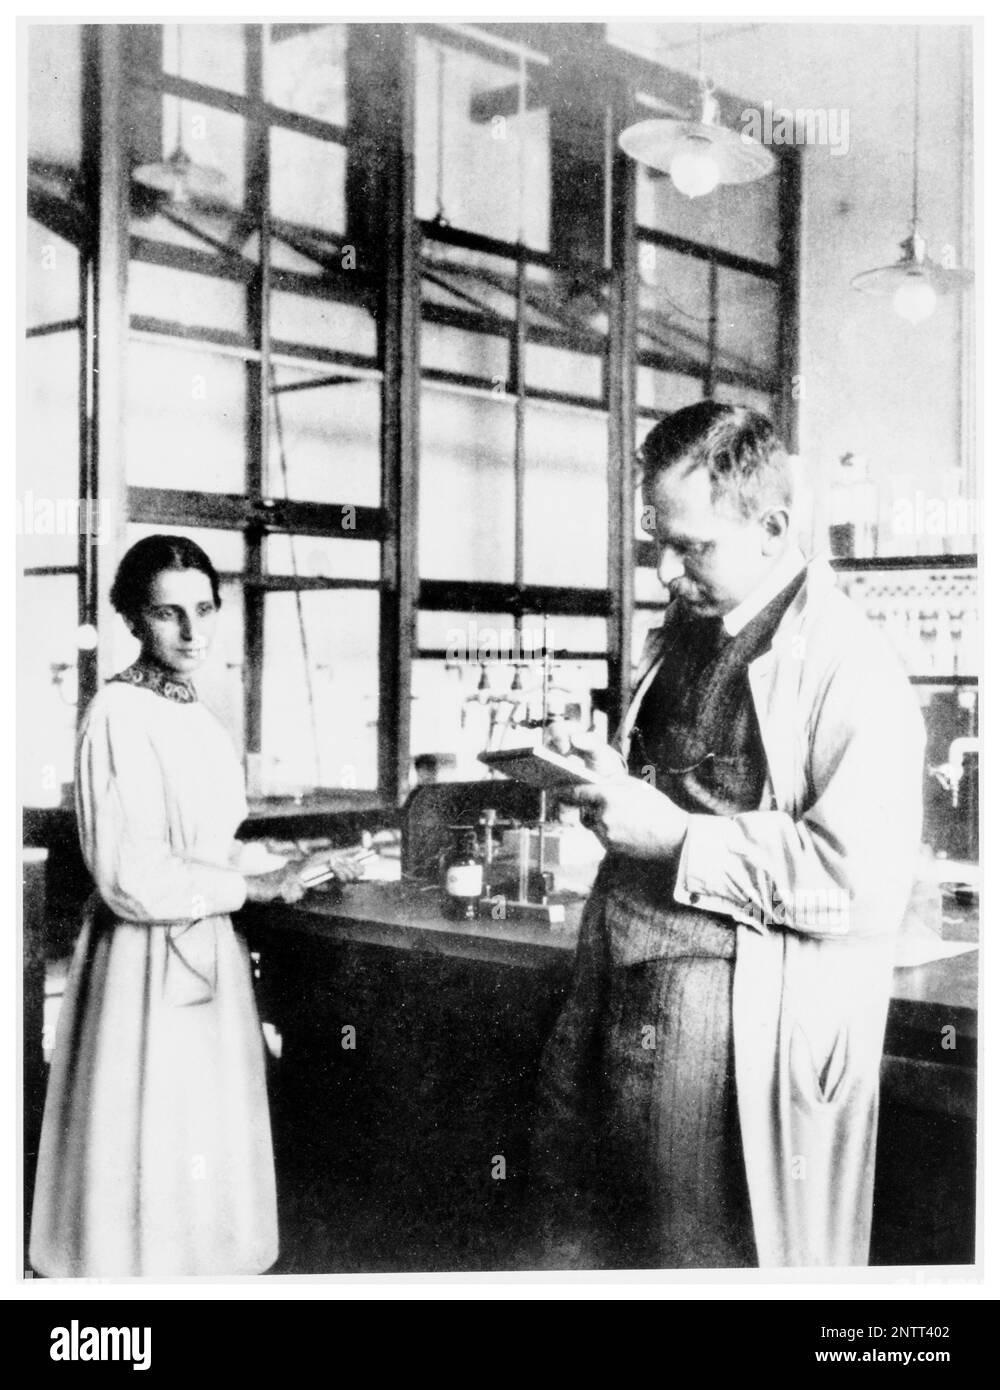 Physicist Lise Meitner (1878-1968) photographed with Chemist Otto Hahn (1879-1968) in a laboratory at the Kaiser Wilhelm Institute for Chemistry, Berlin-Dahlem, circa 1913 Stock Photo